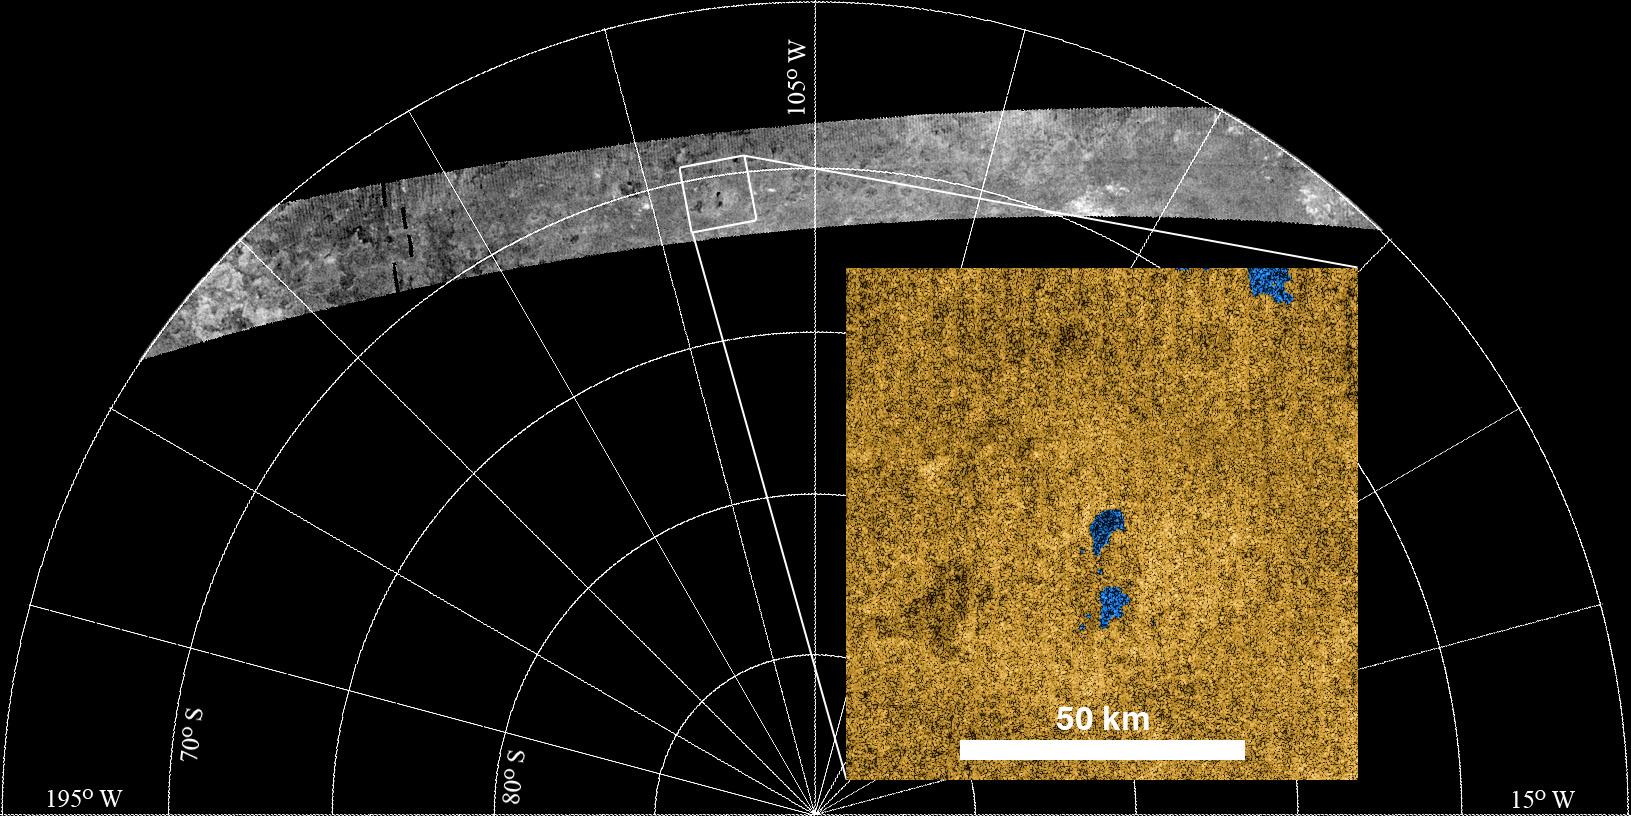 Cassini radar images of a portion of Titan's surface on an illustration showing the relative size of the moon